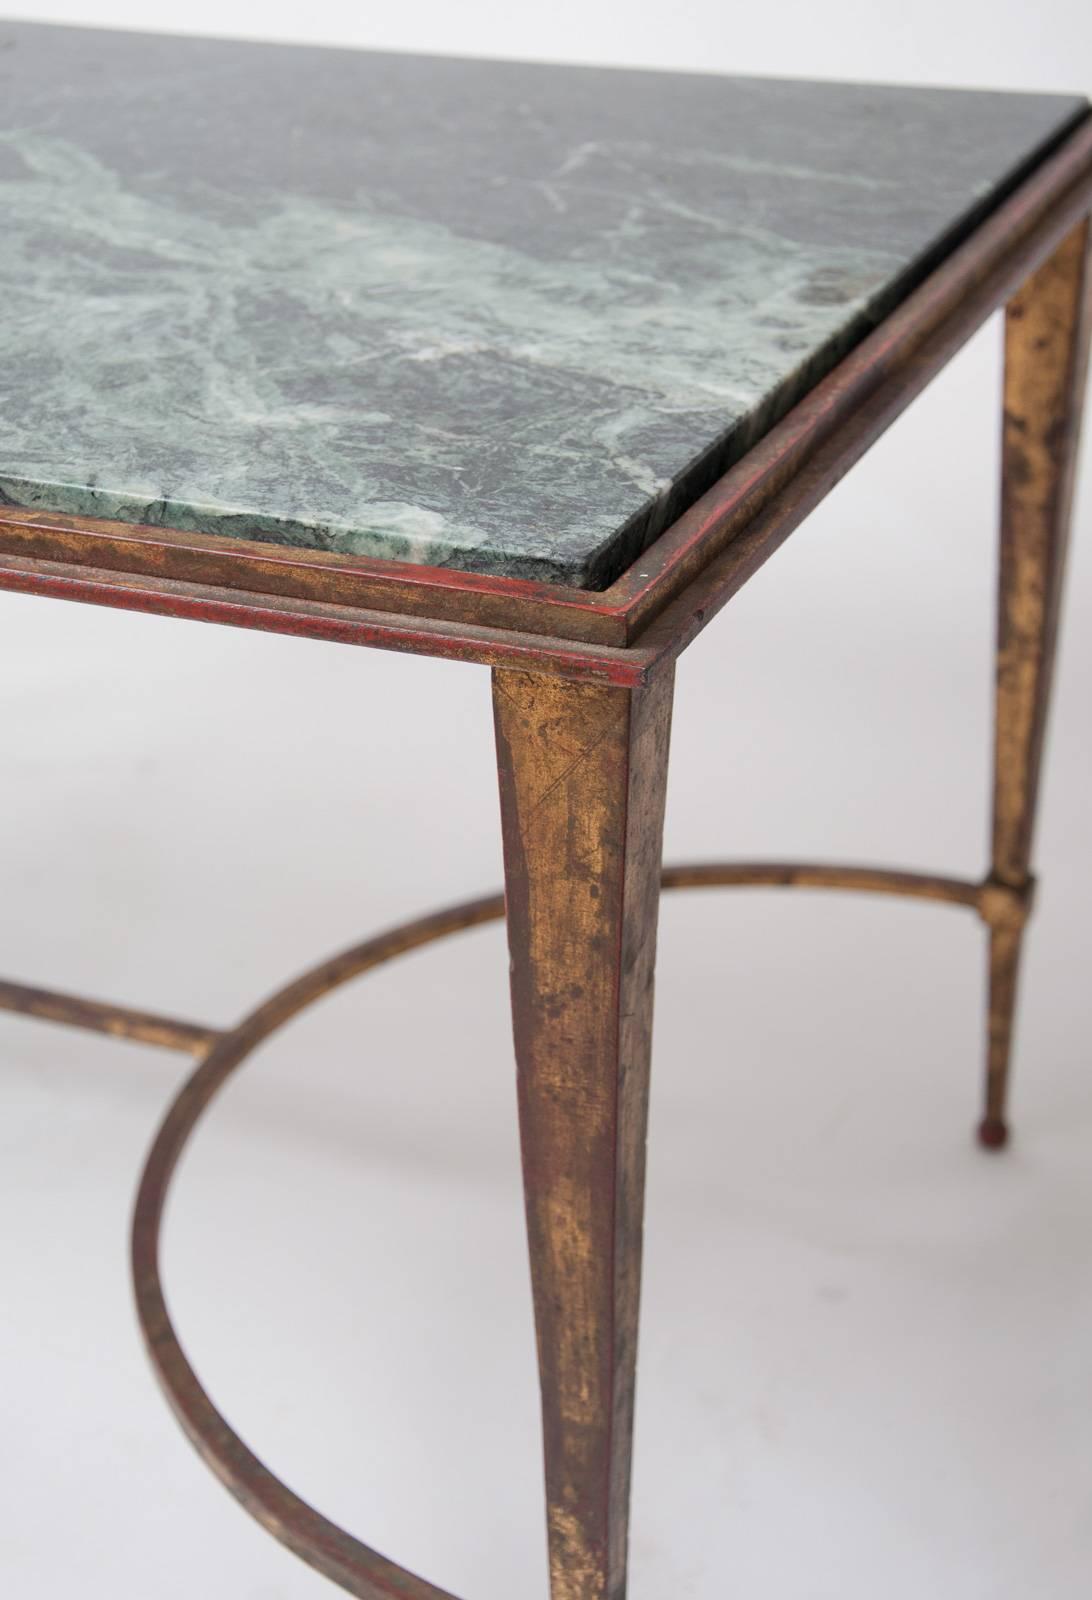 Gilded wrought iron low table with verde antico marble top attributed to Maison Ramsay,
Paris, France, circa 1950.